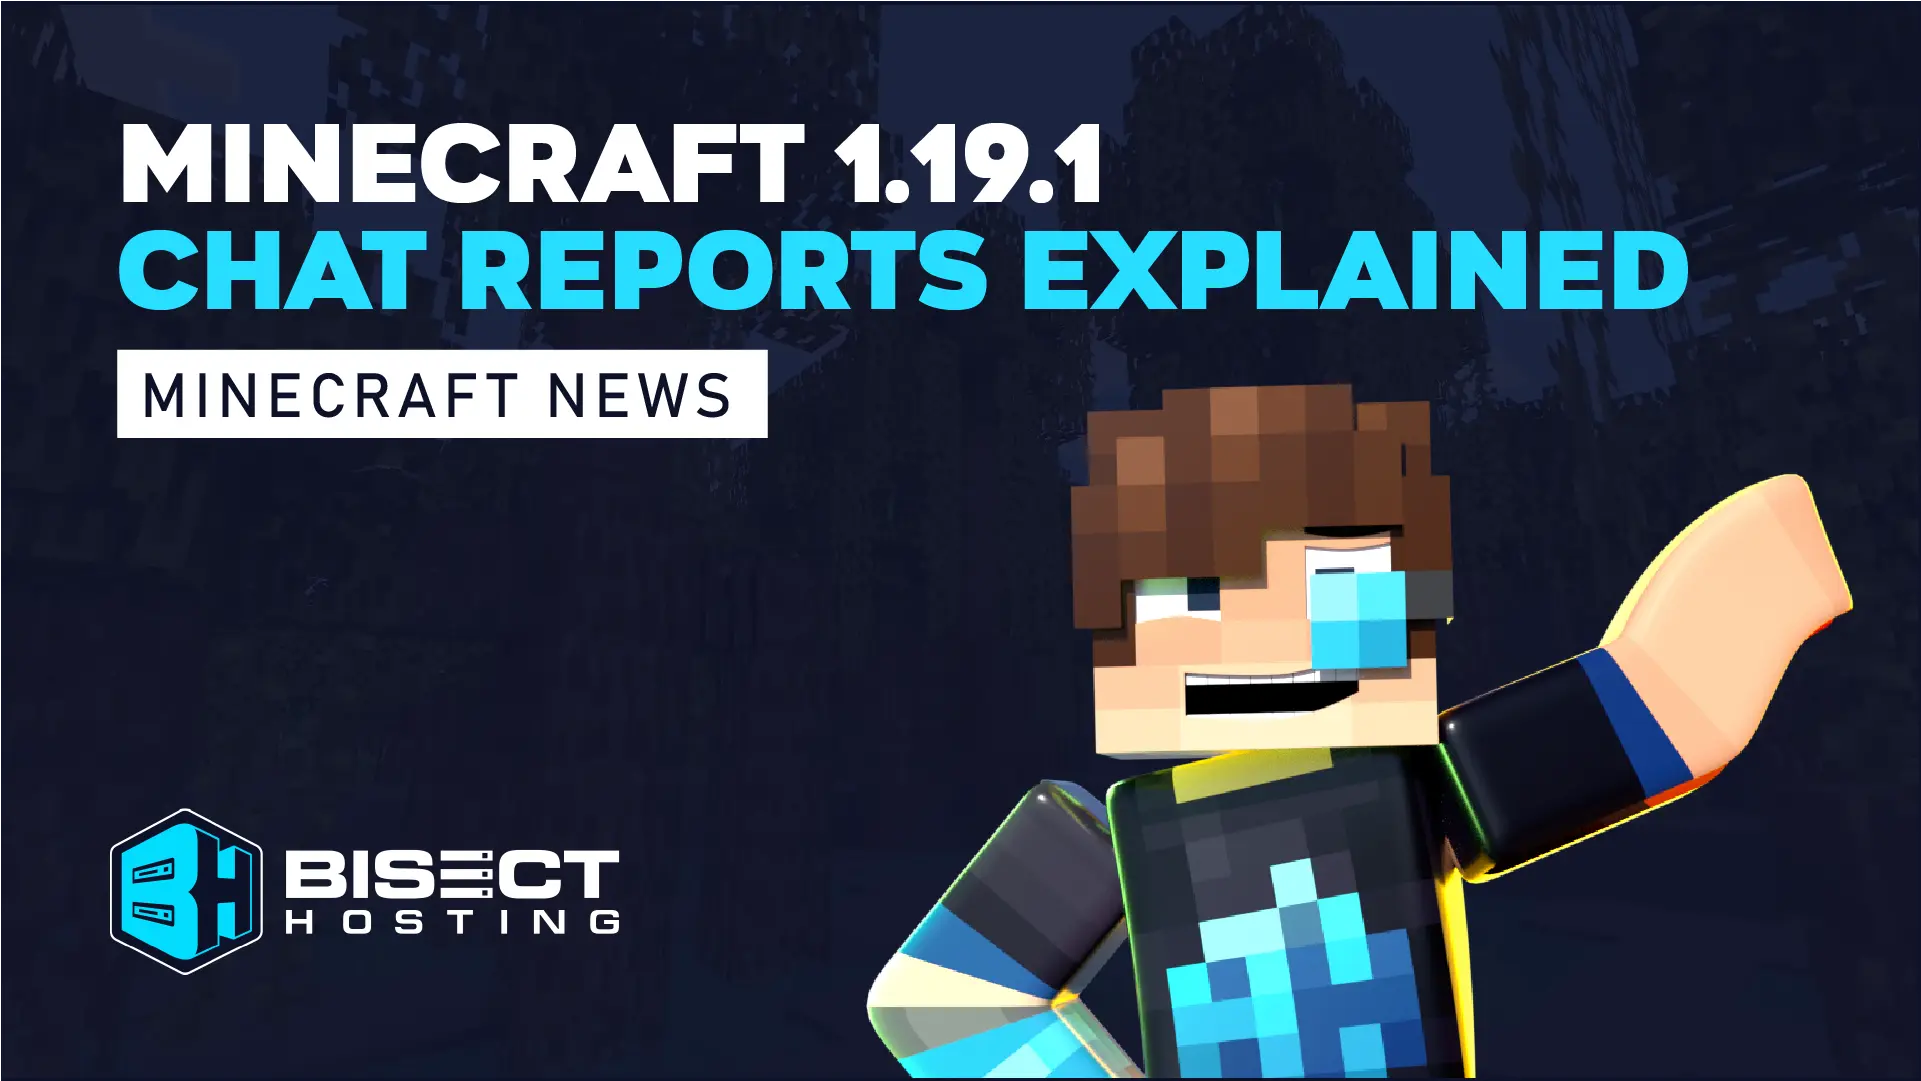 Minecraft 1.19.1 Global Chat Reports Explained